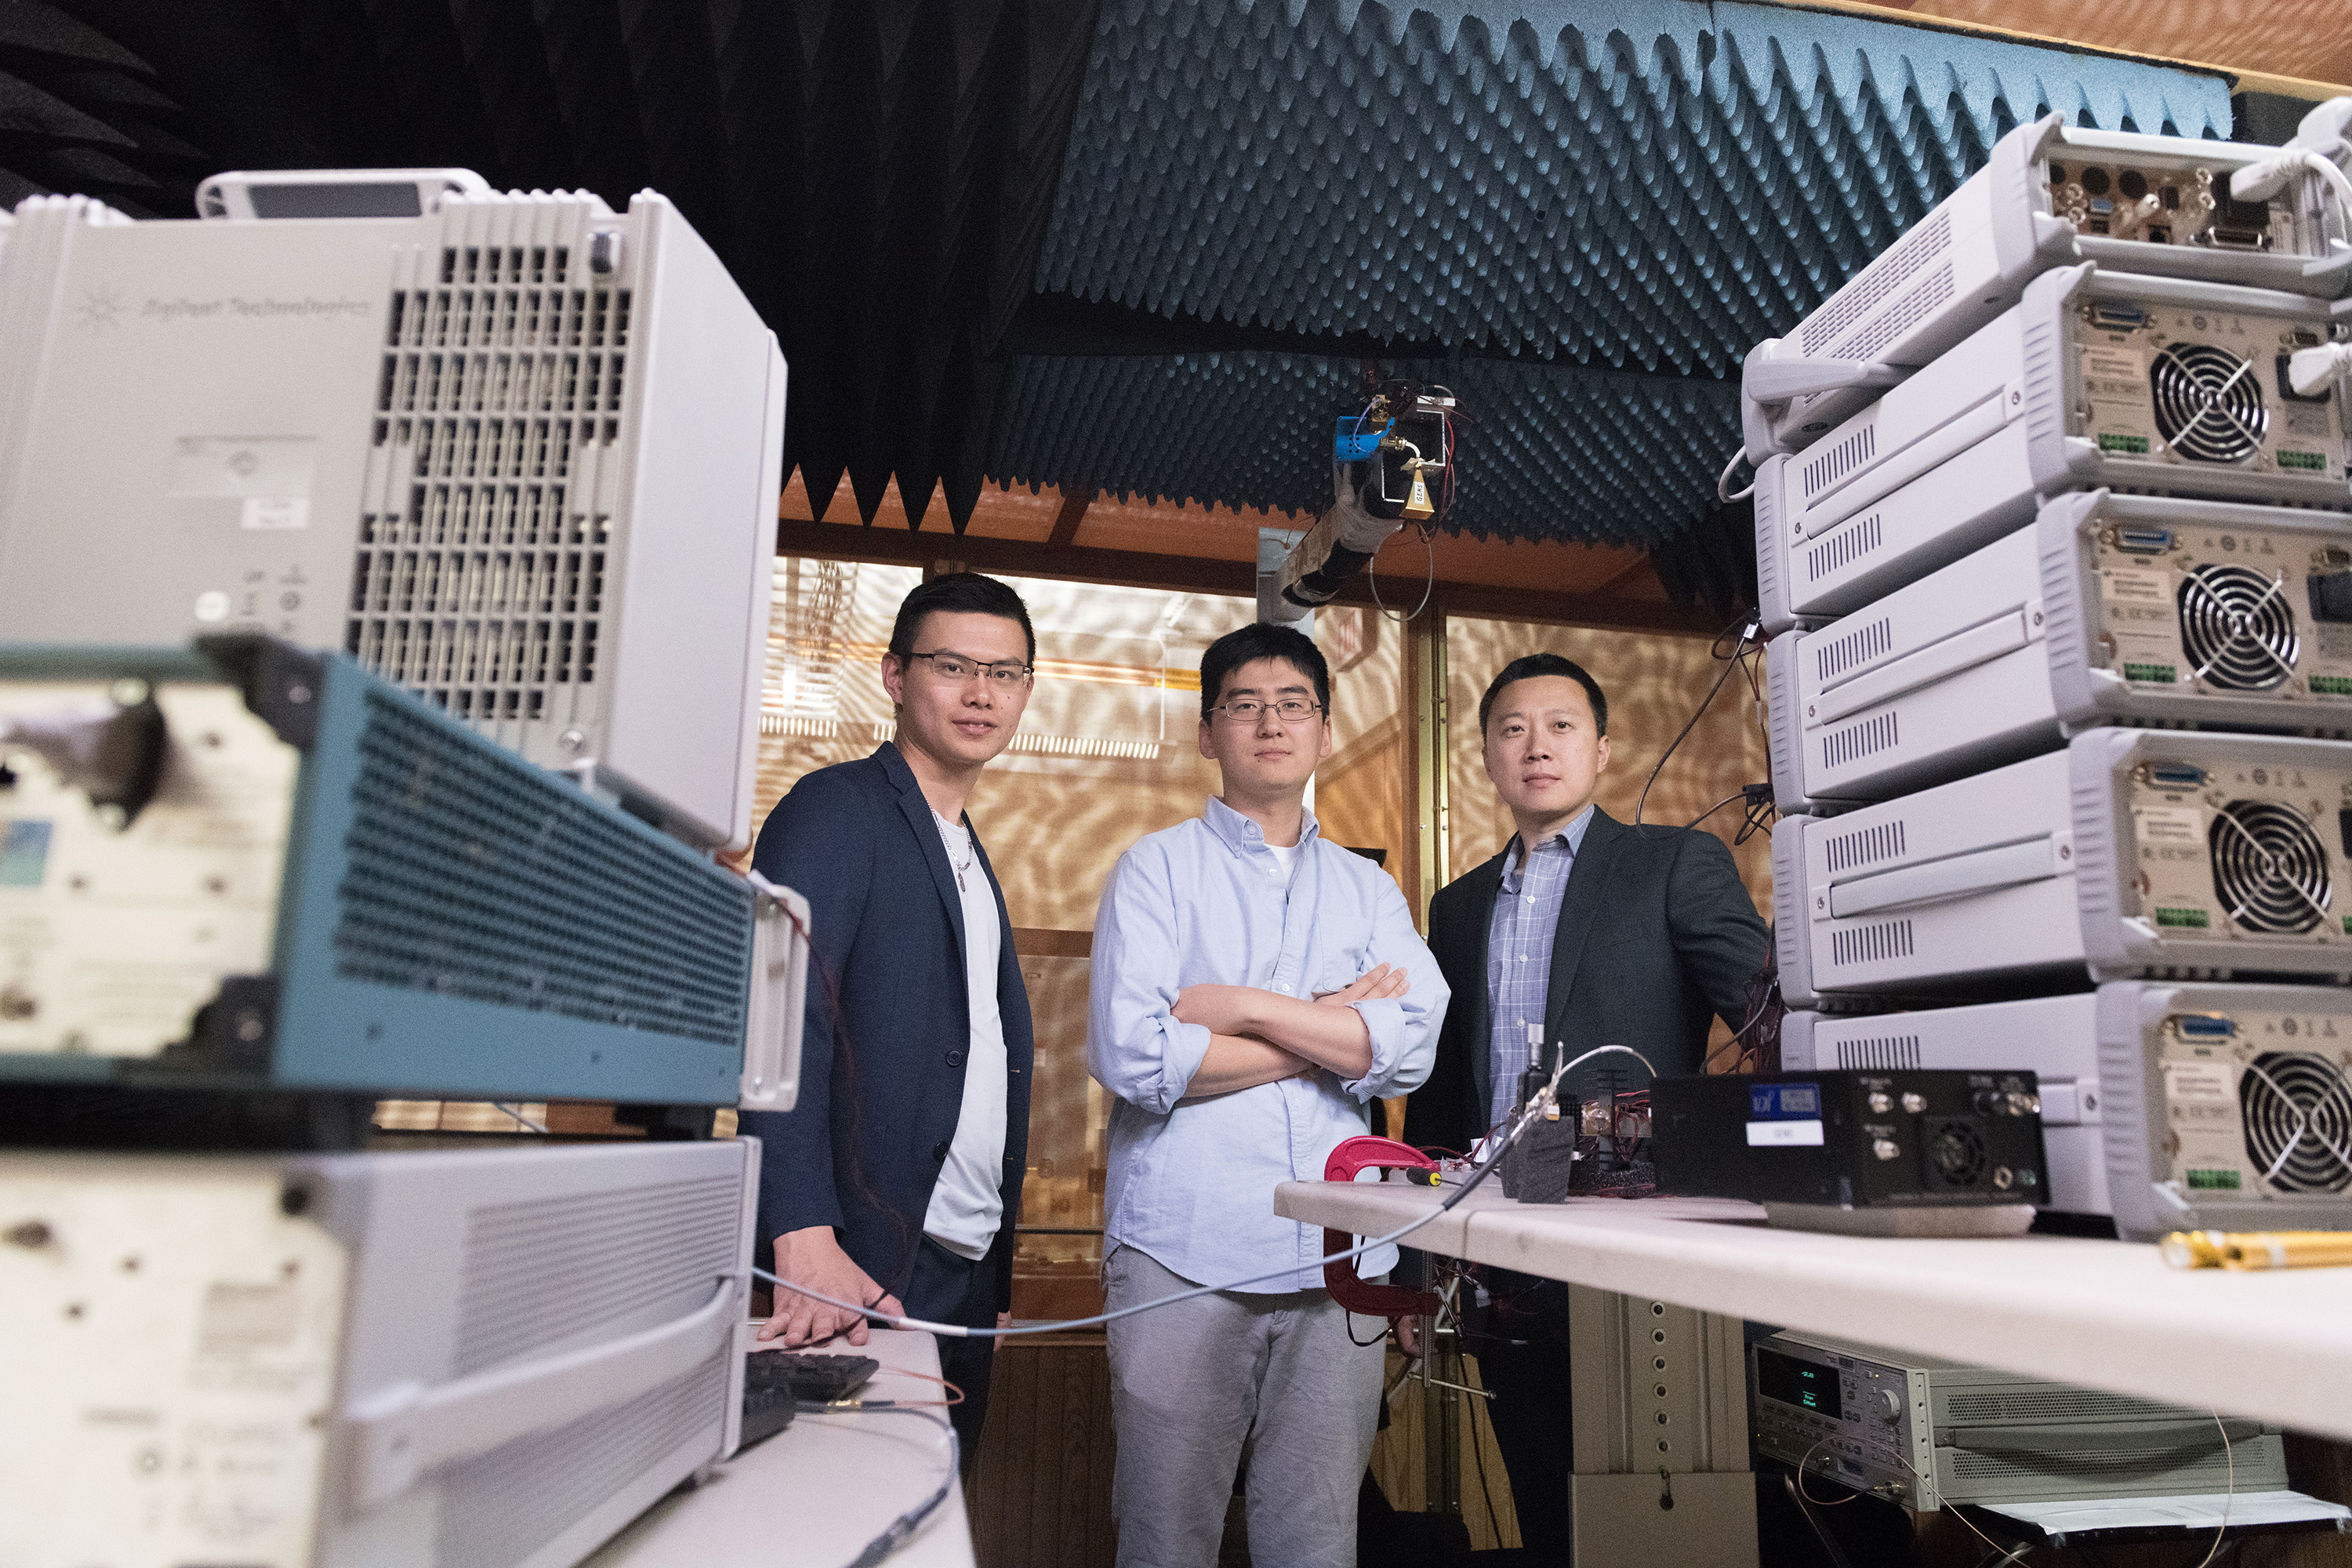 Georgia Tech researchers are shown with electronics equipment and antenna setup used to measure far-field radiated output signal from millimeter wave transmitters. Shown are Graduate Research Assistant Huy Thong Nguyen, Graduate Research Assistant Sensen Li, and Assistant Professor Hua Wang. (Credit: Allison Carter, Georgia Tech)